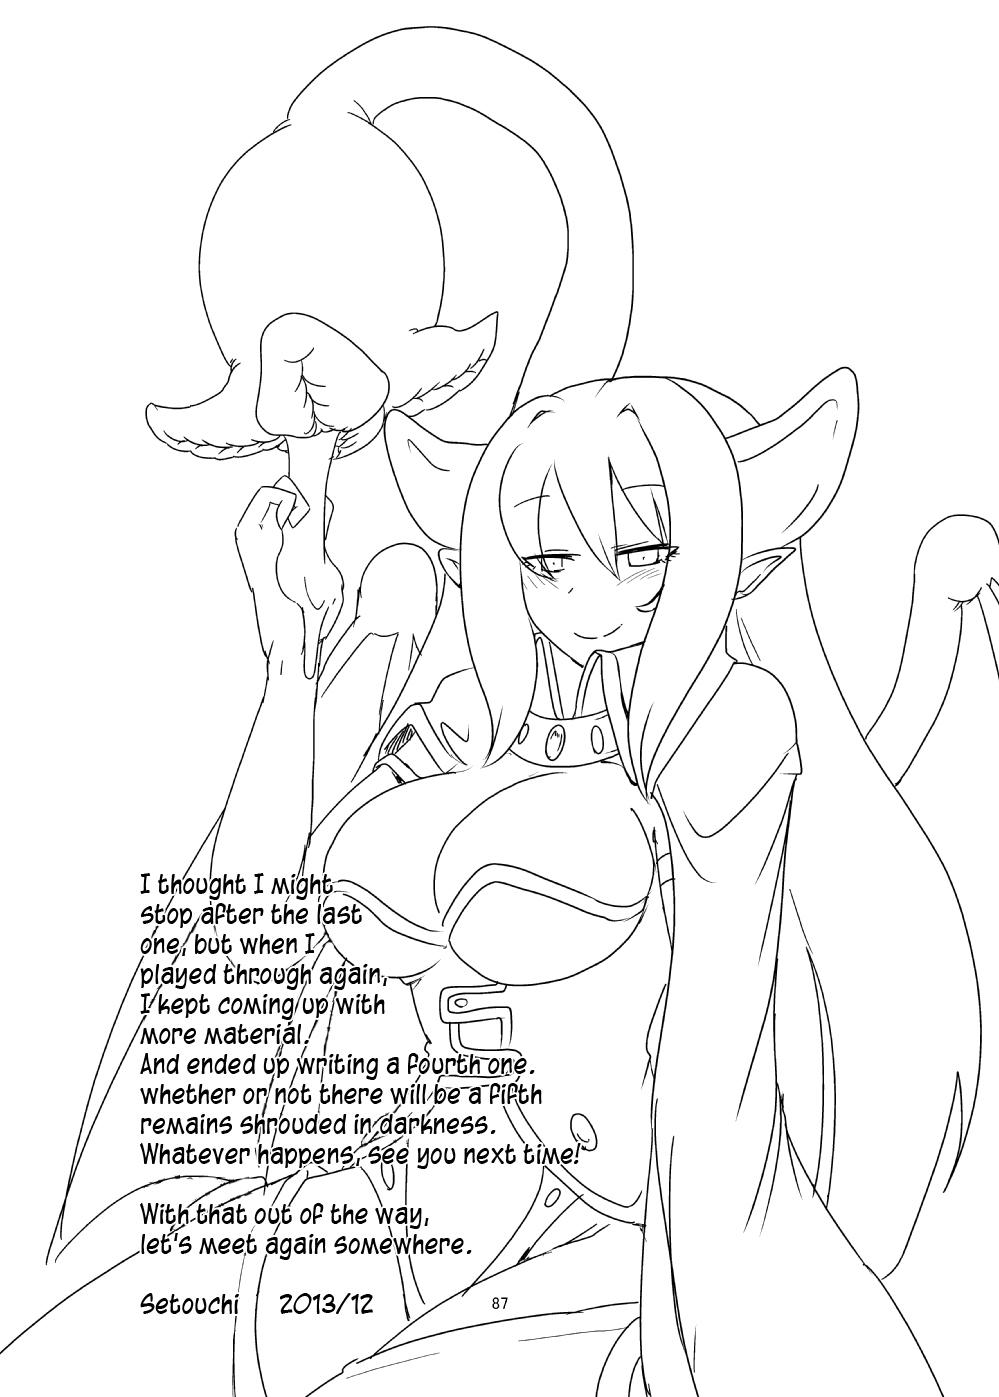 Clip Mon Musu Quest! Beyond The End 4 - Monster girl quest Head - Page 80